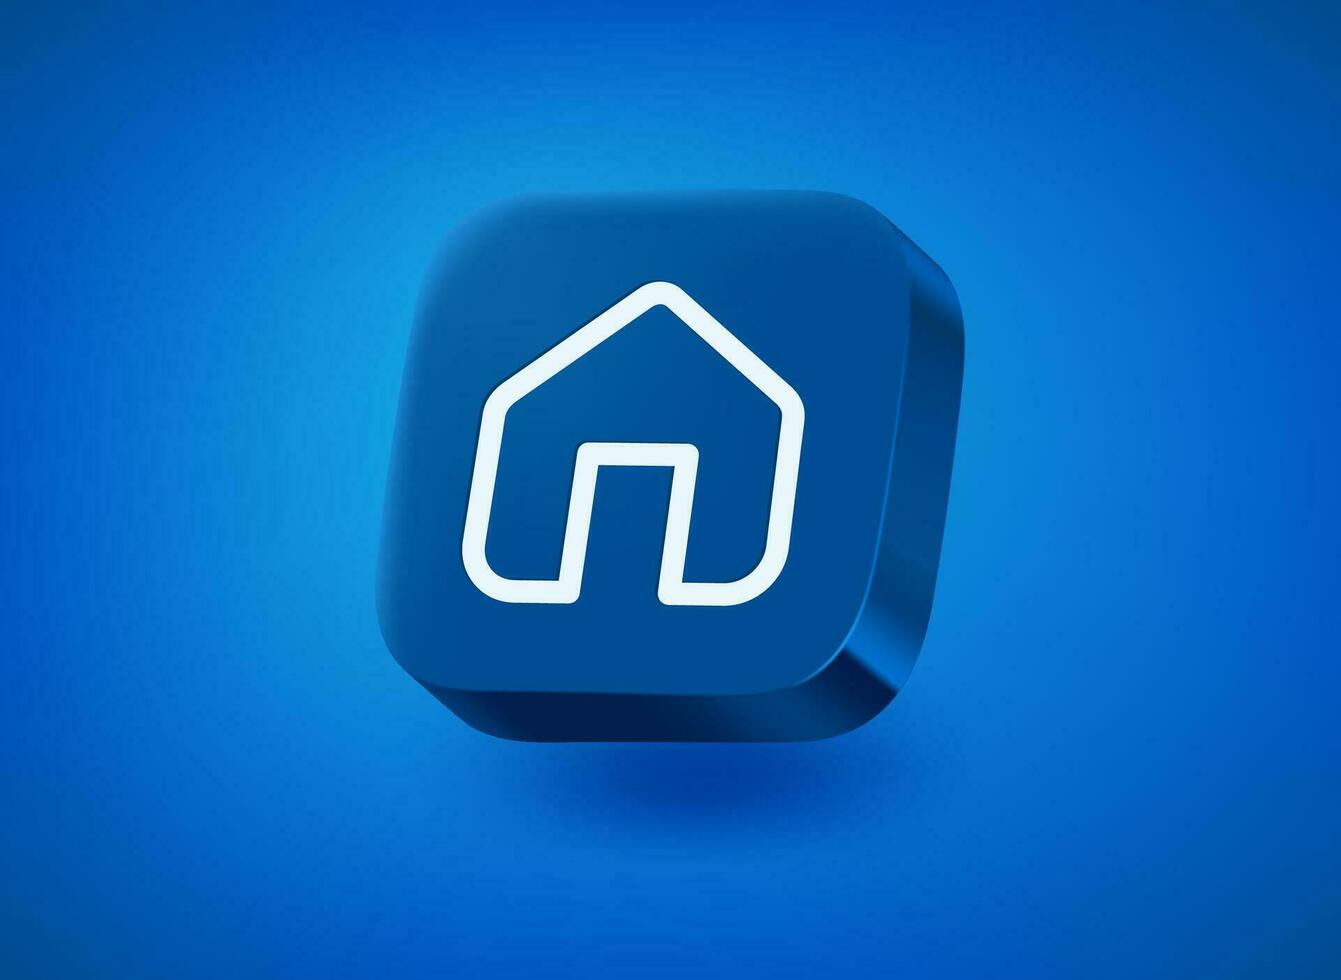 Home icon. Vector 3d illustration of app button